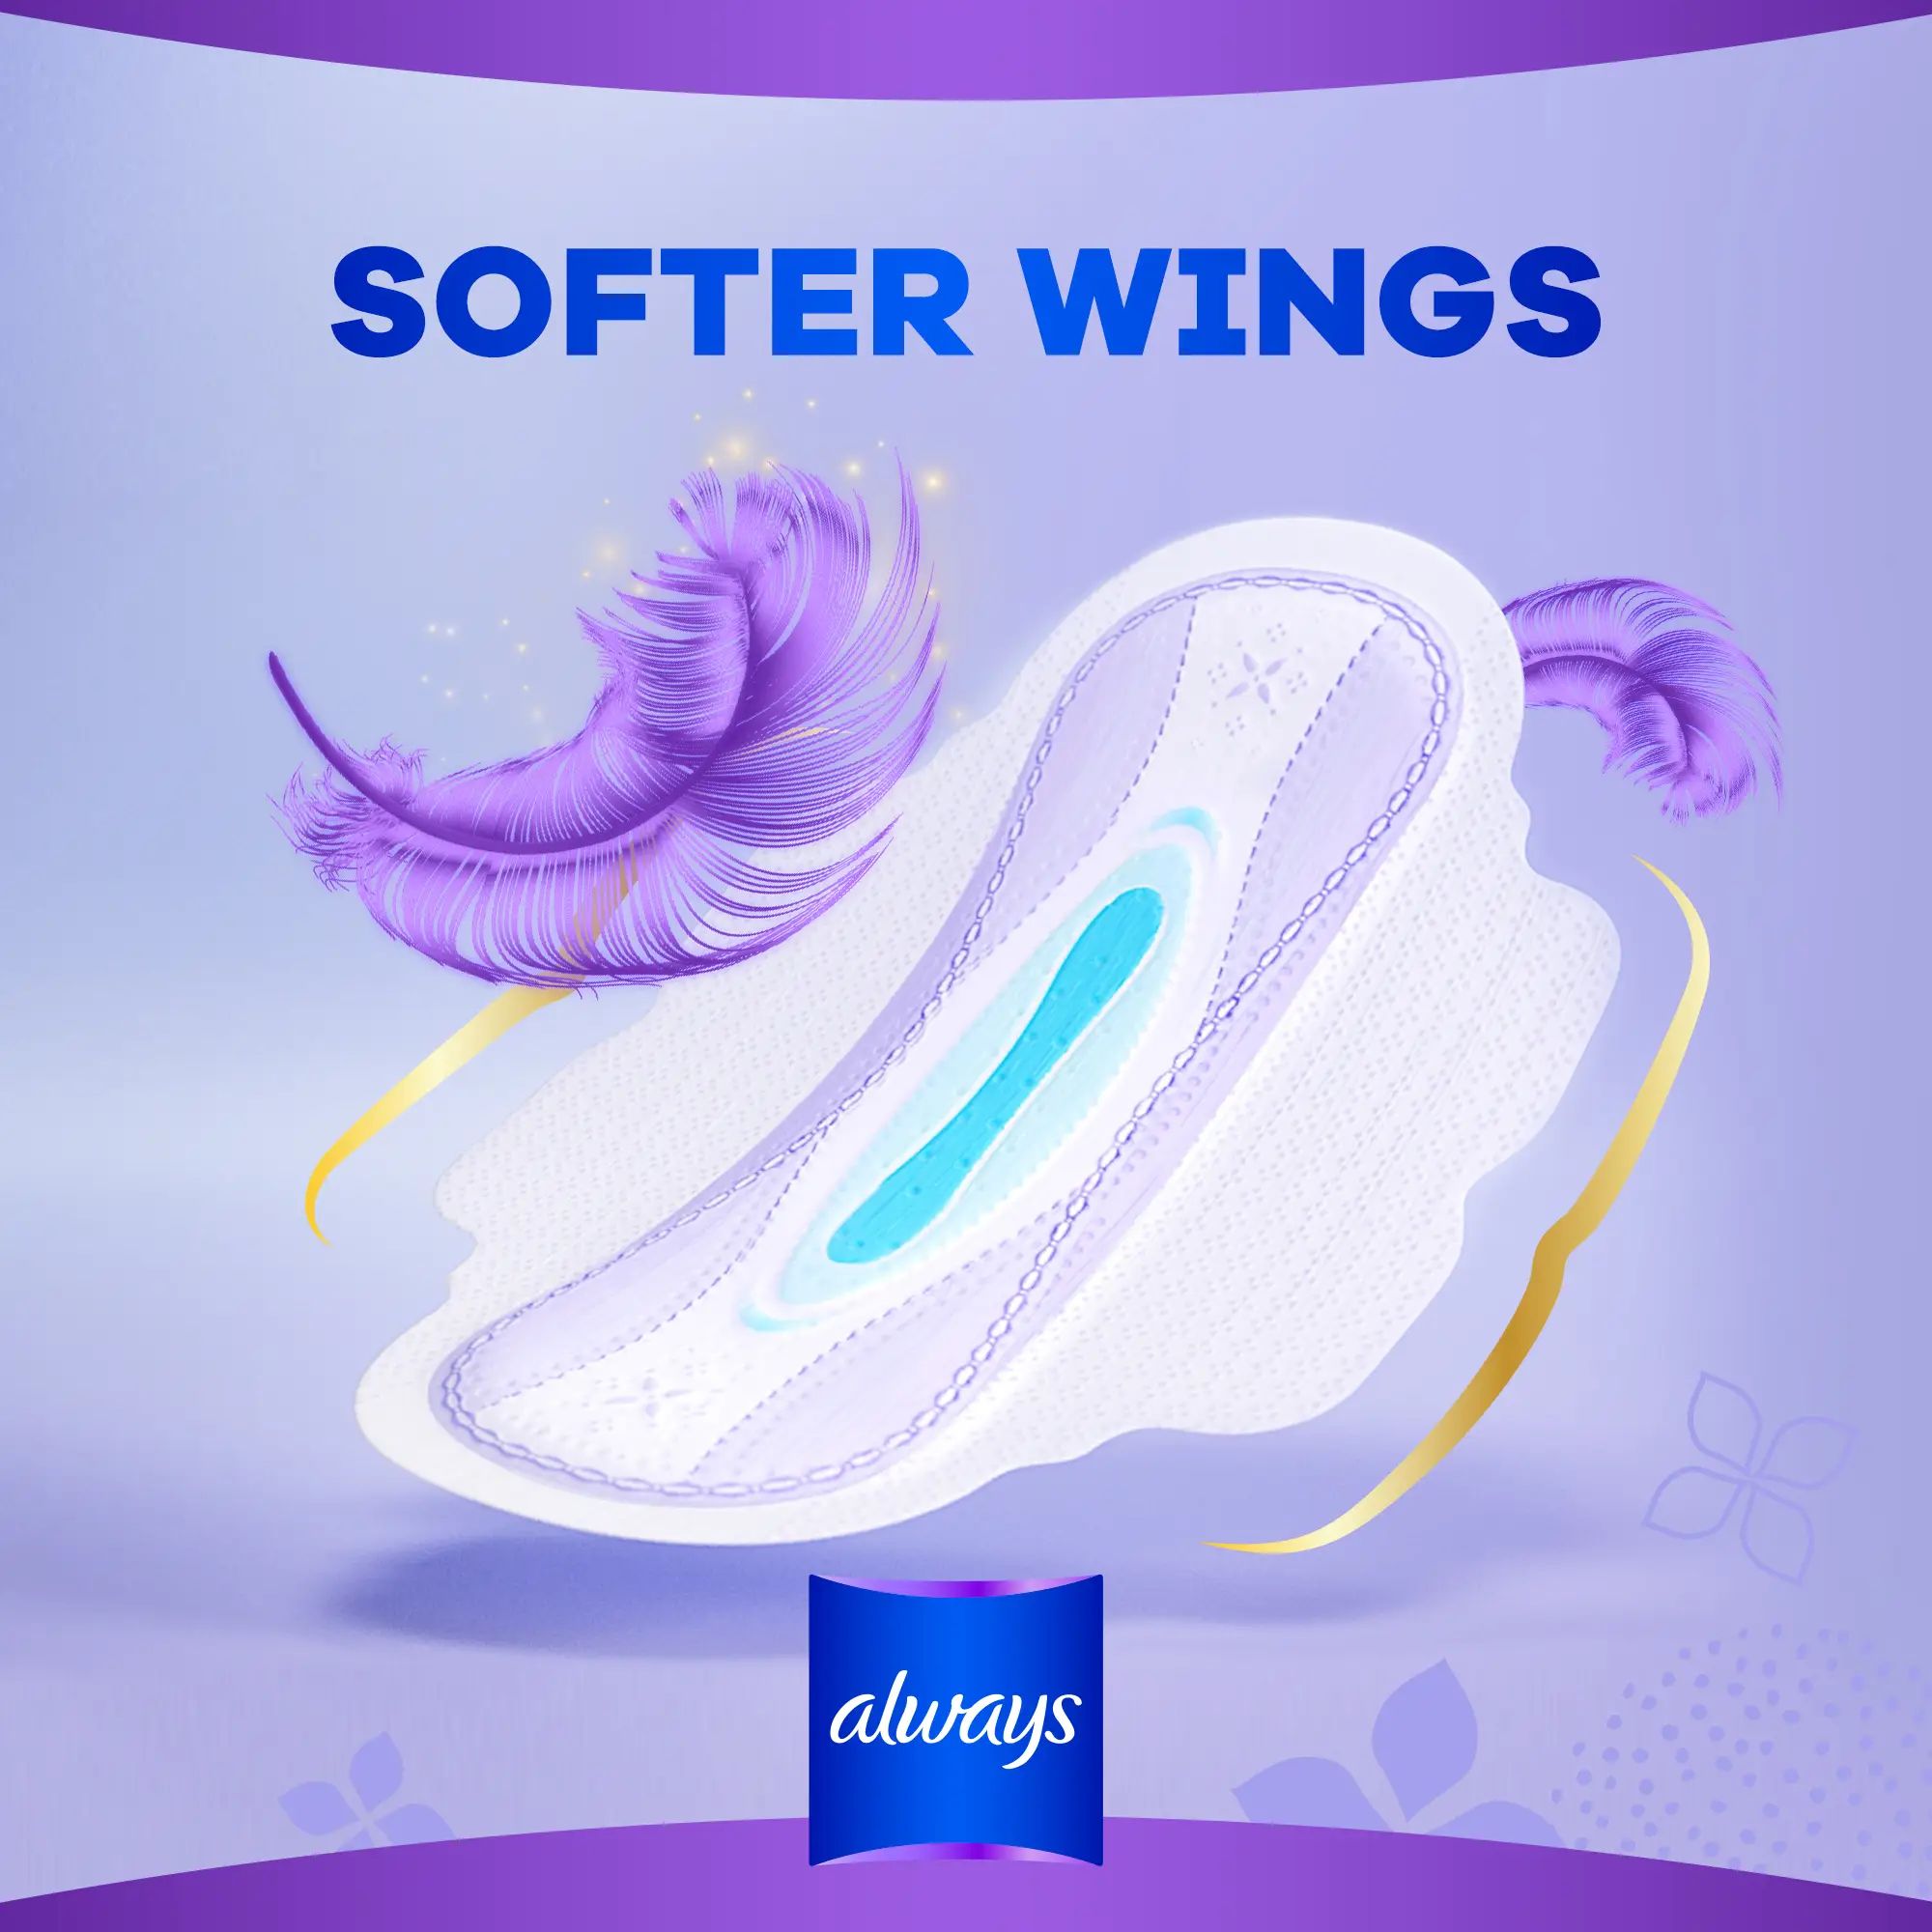 Always All in one Ultra Thin, Night sanitary pads with wings, 12 Pads